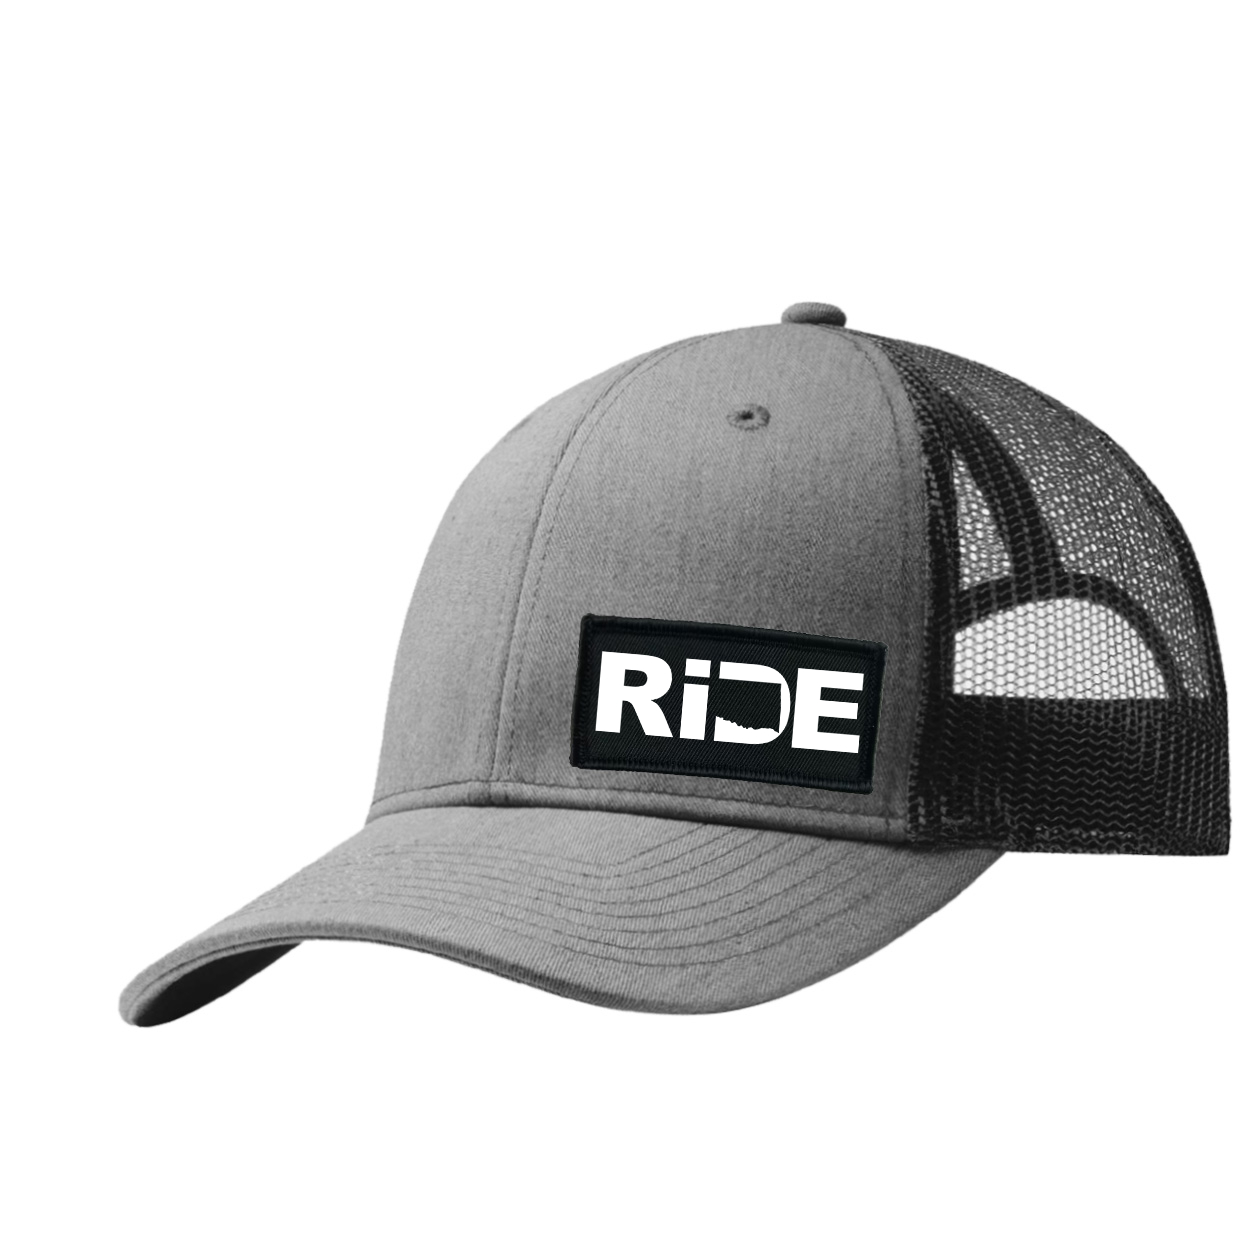 Ride Oklahoma Night Out Woven Patch Snapback Trucker Hat Heather Gray/Black (White Logo)